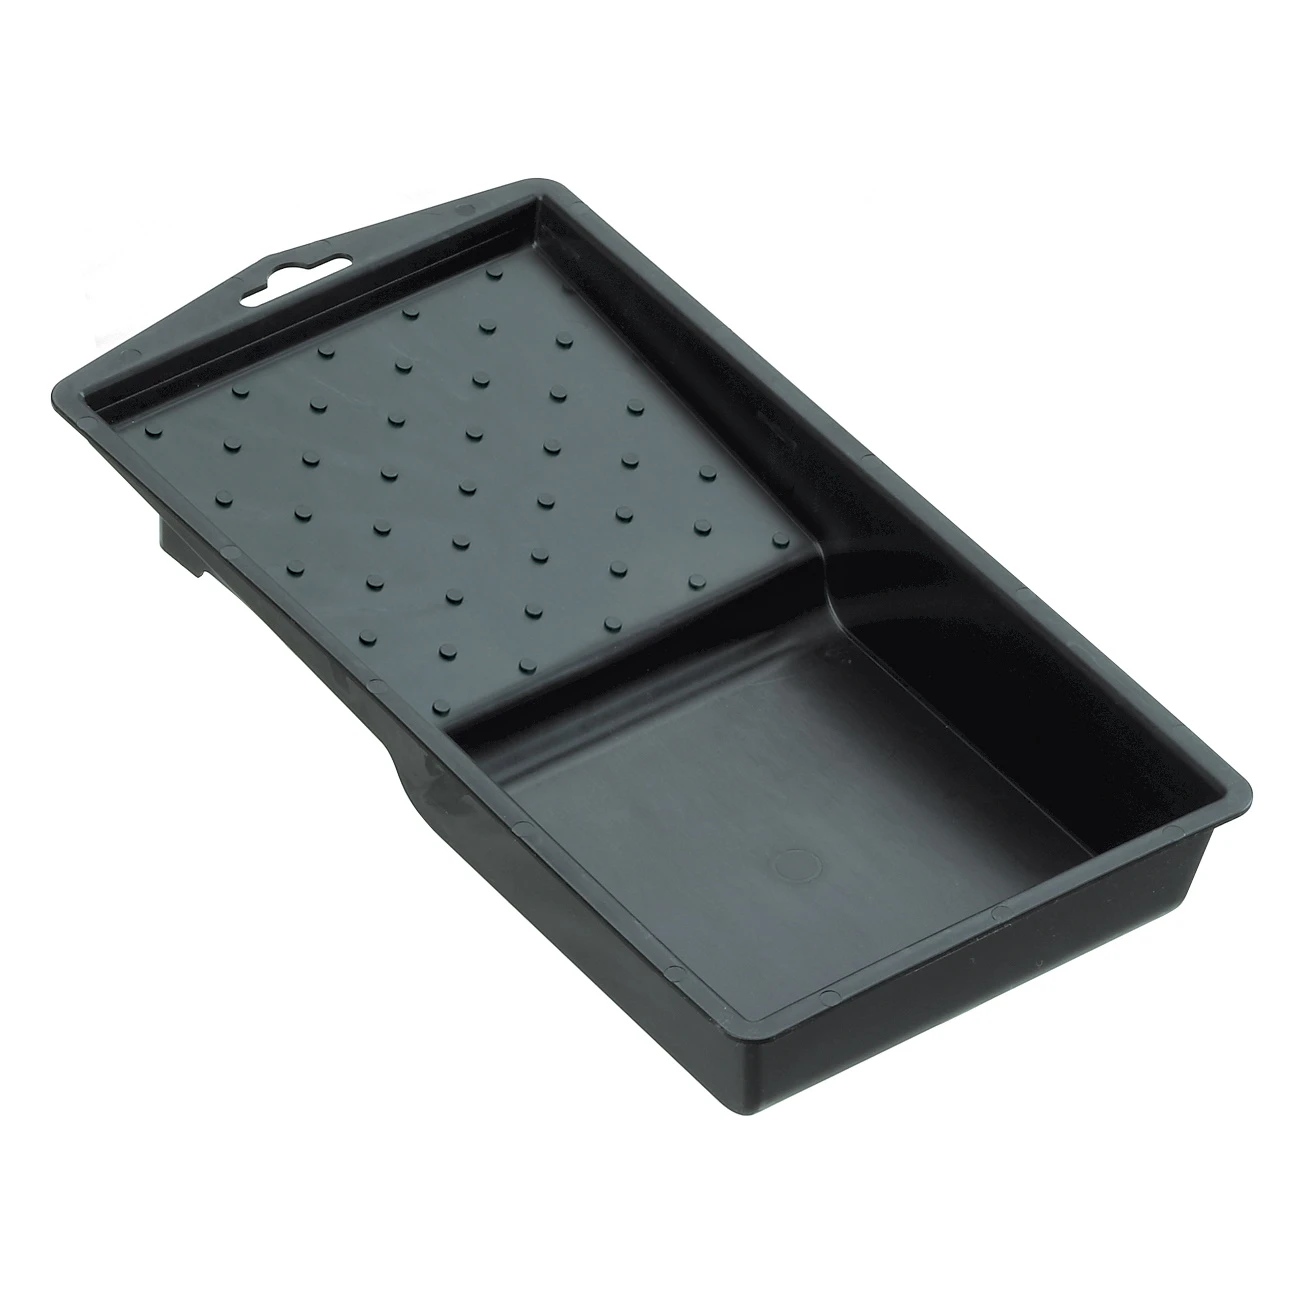 LG Harris - Seriously Good - 4" Paint Roller Tray